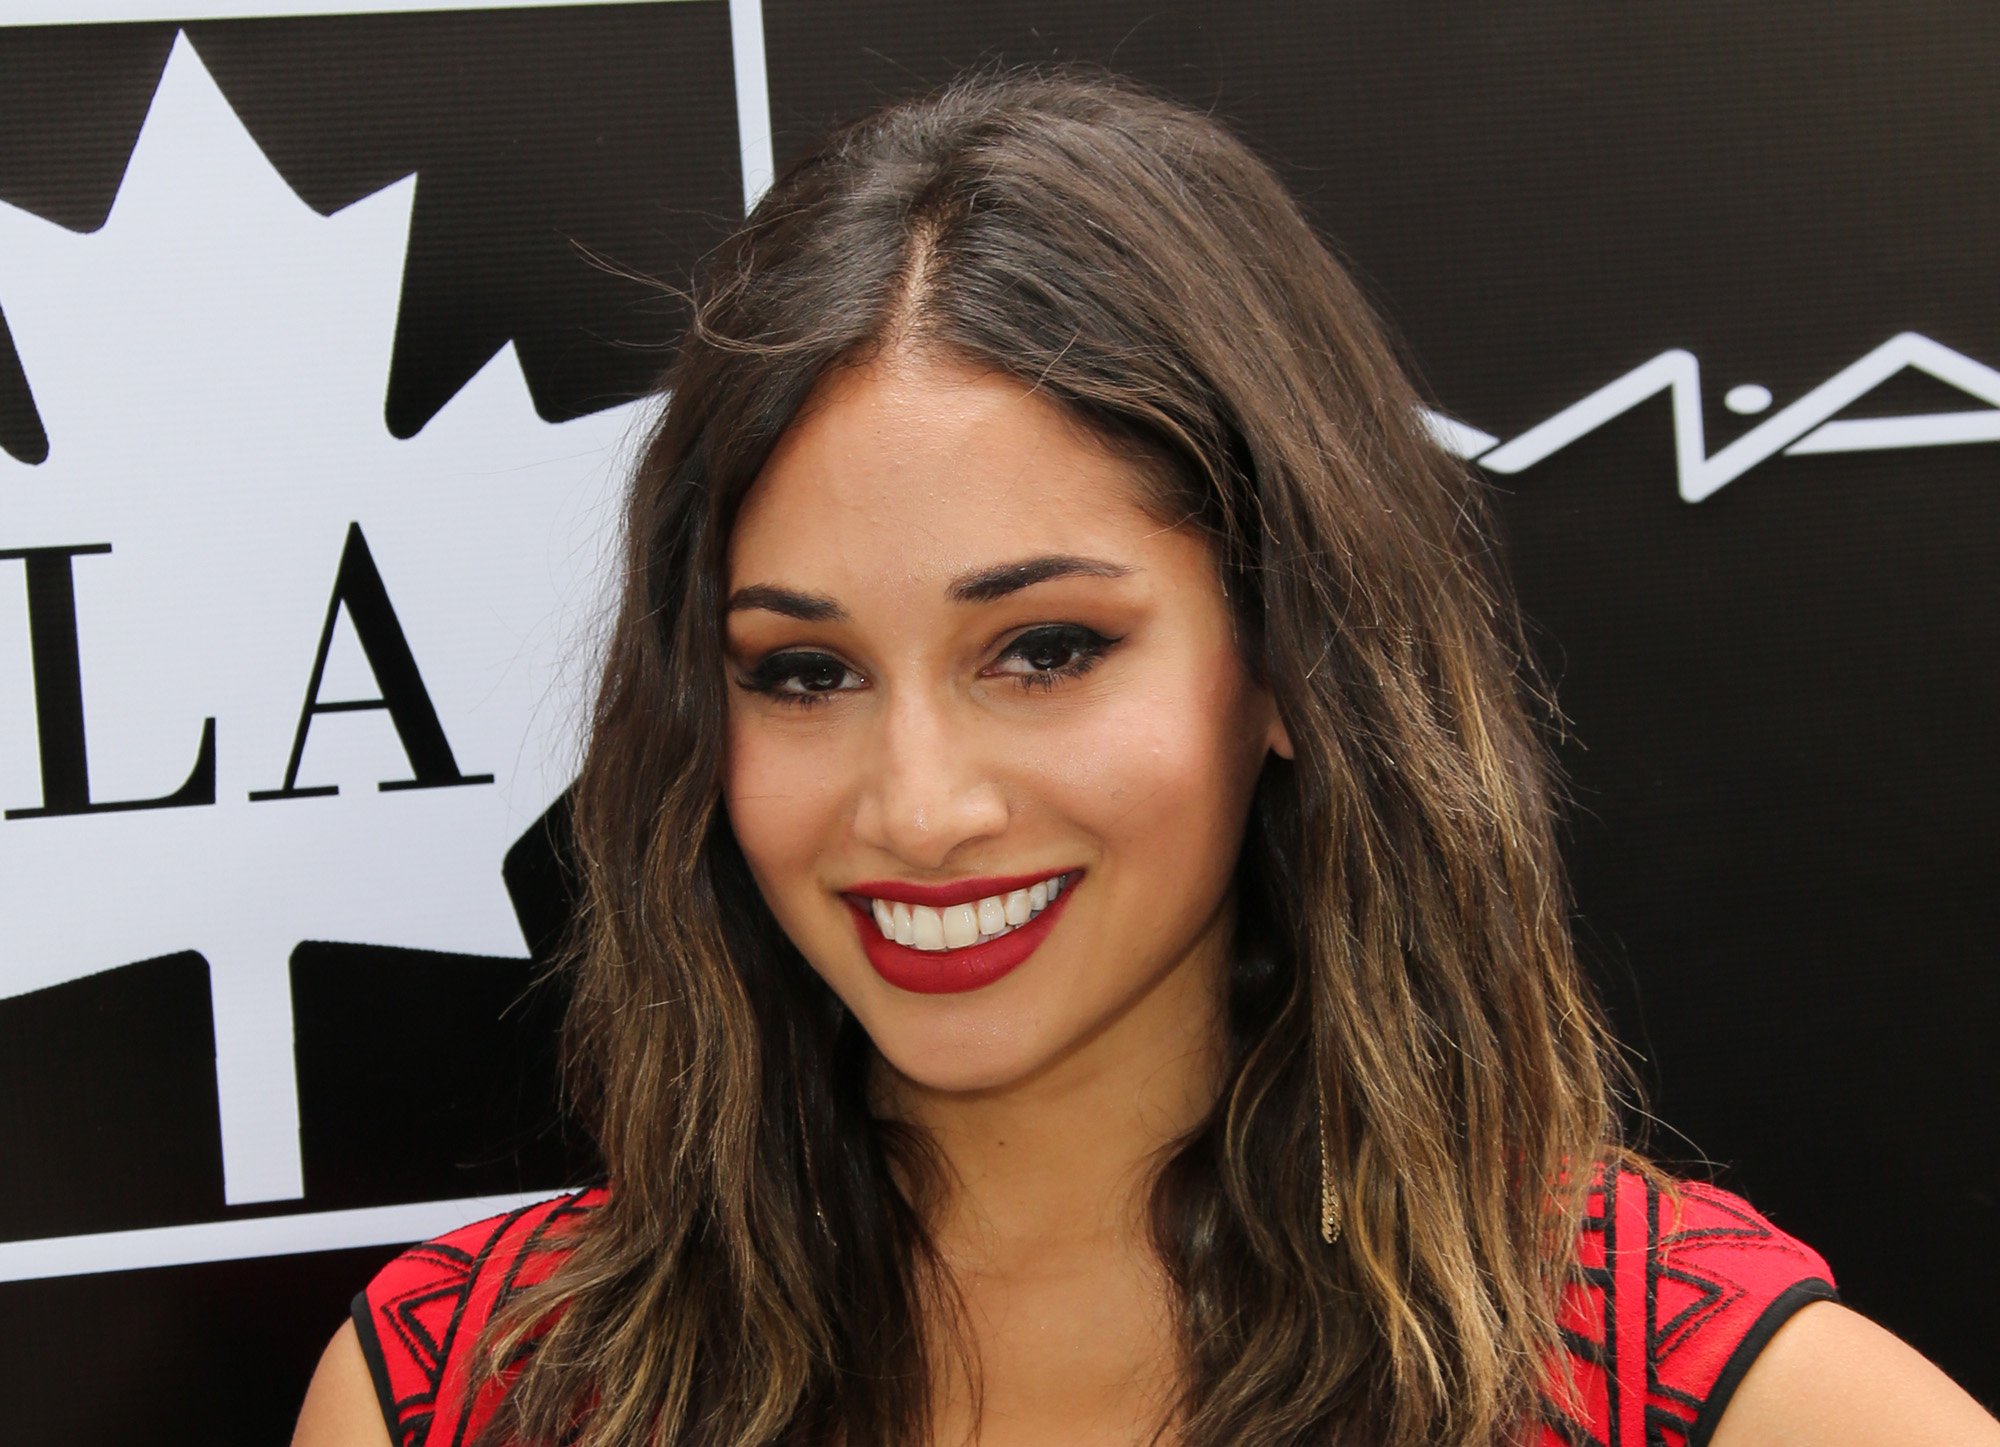 Meaghan Rath arrives at the 2015 Golden Maple Awards. (Paul Archuleta&mdash;FilmMagic/Getty Images)